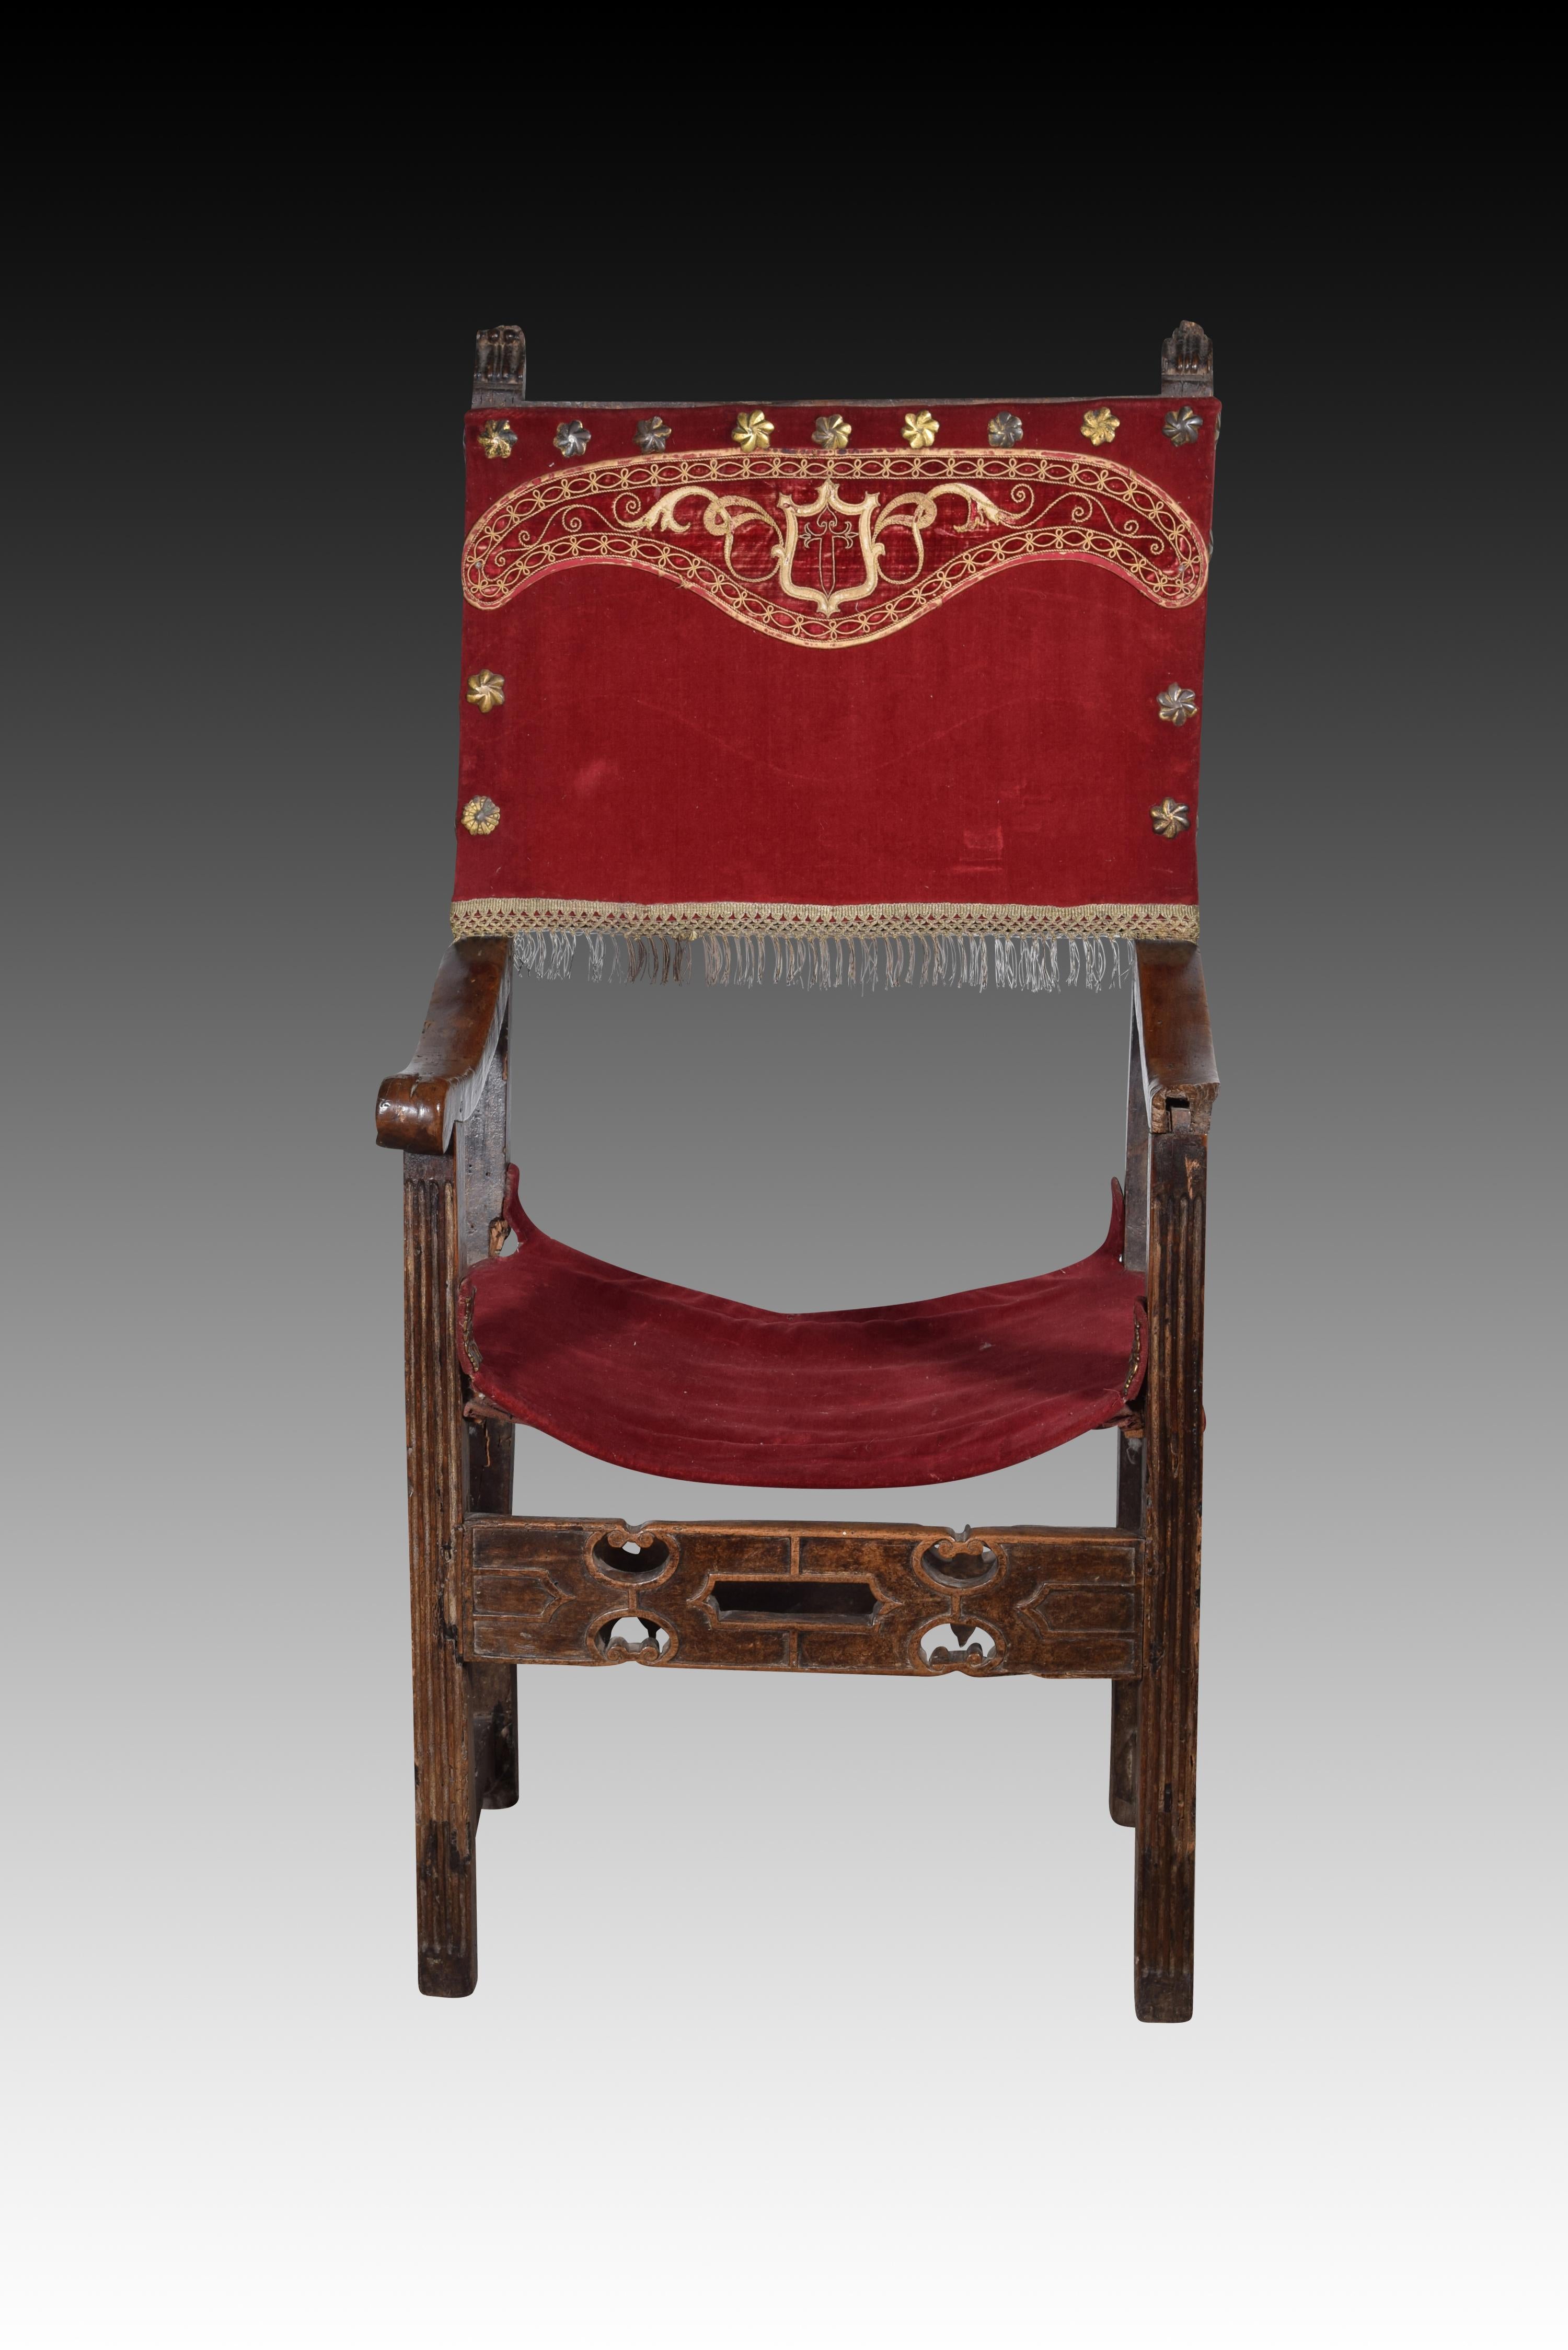 Friar armchair. Walnut wood, textile, metal. Spain, 16th century. 
Has defects. 
Armchair with arms and high back of the type known as “frailero”, which has a textile upholstery with studs on the seat and back, low cut-out profile chambrances